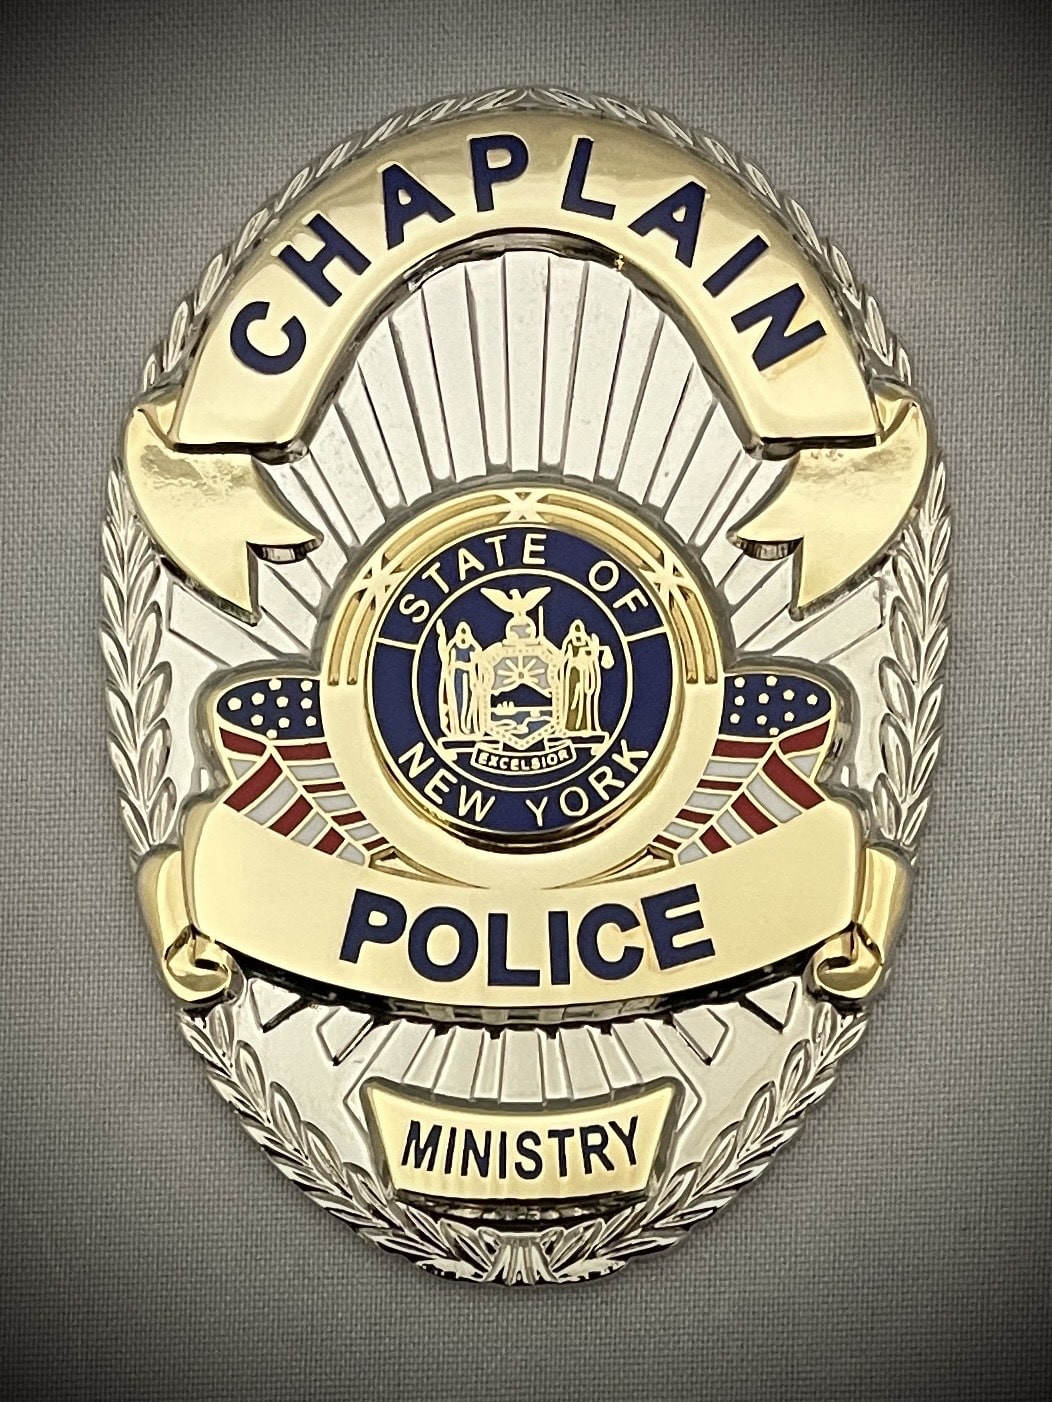 Chaplain Police - Badge with Pin and Safety Catch